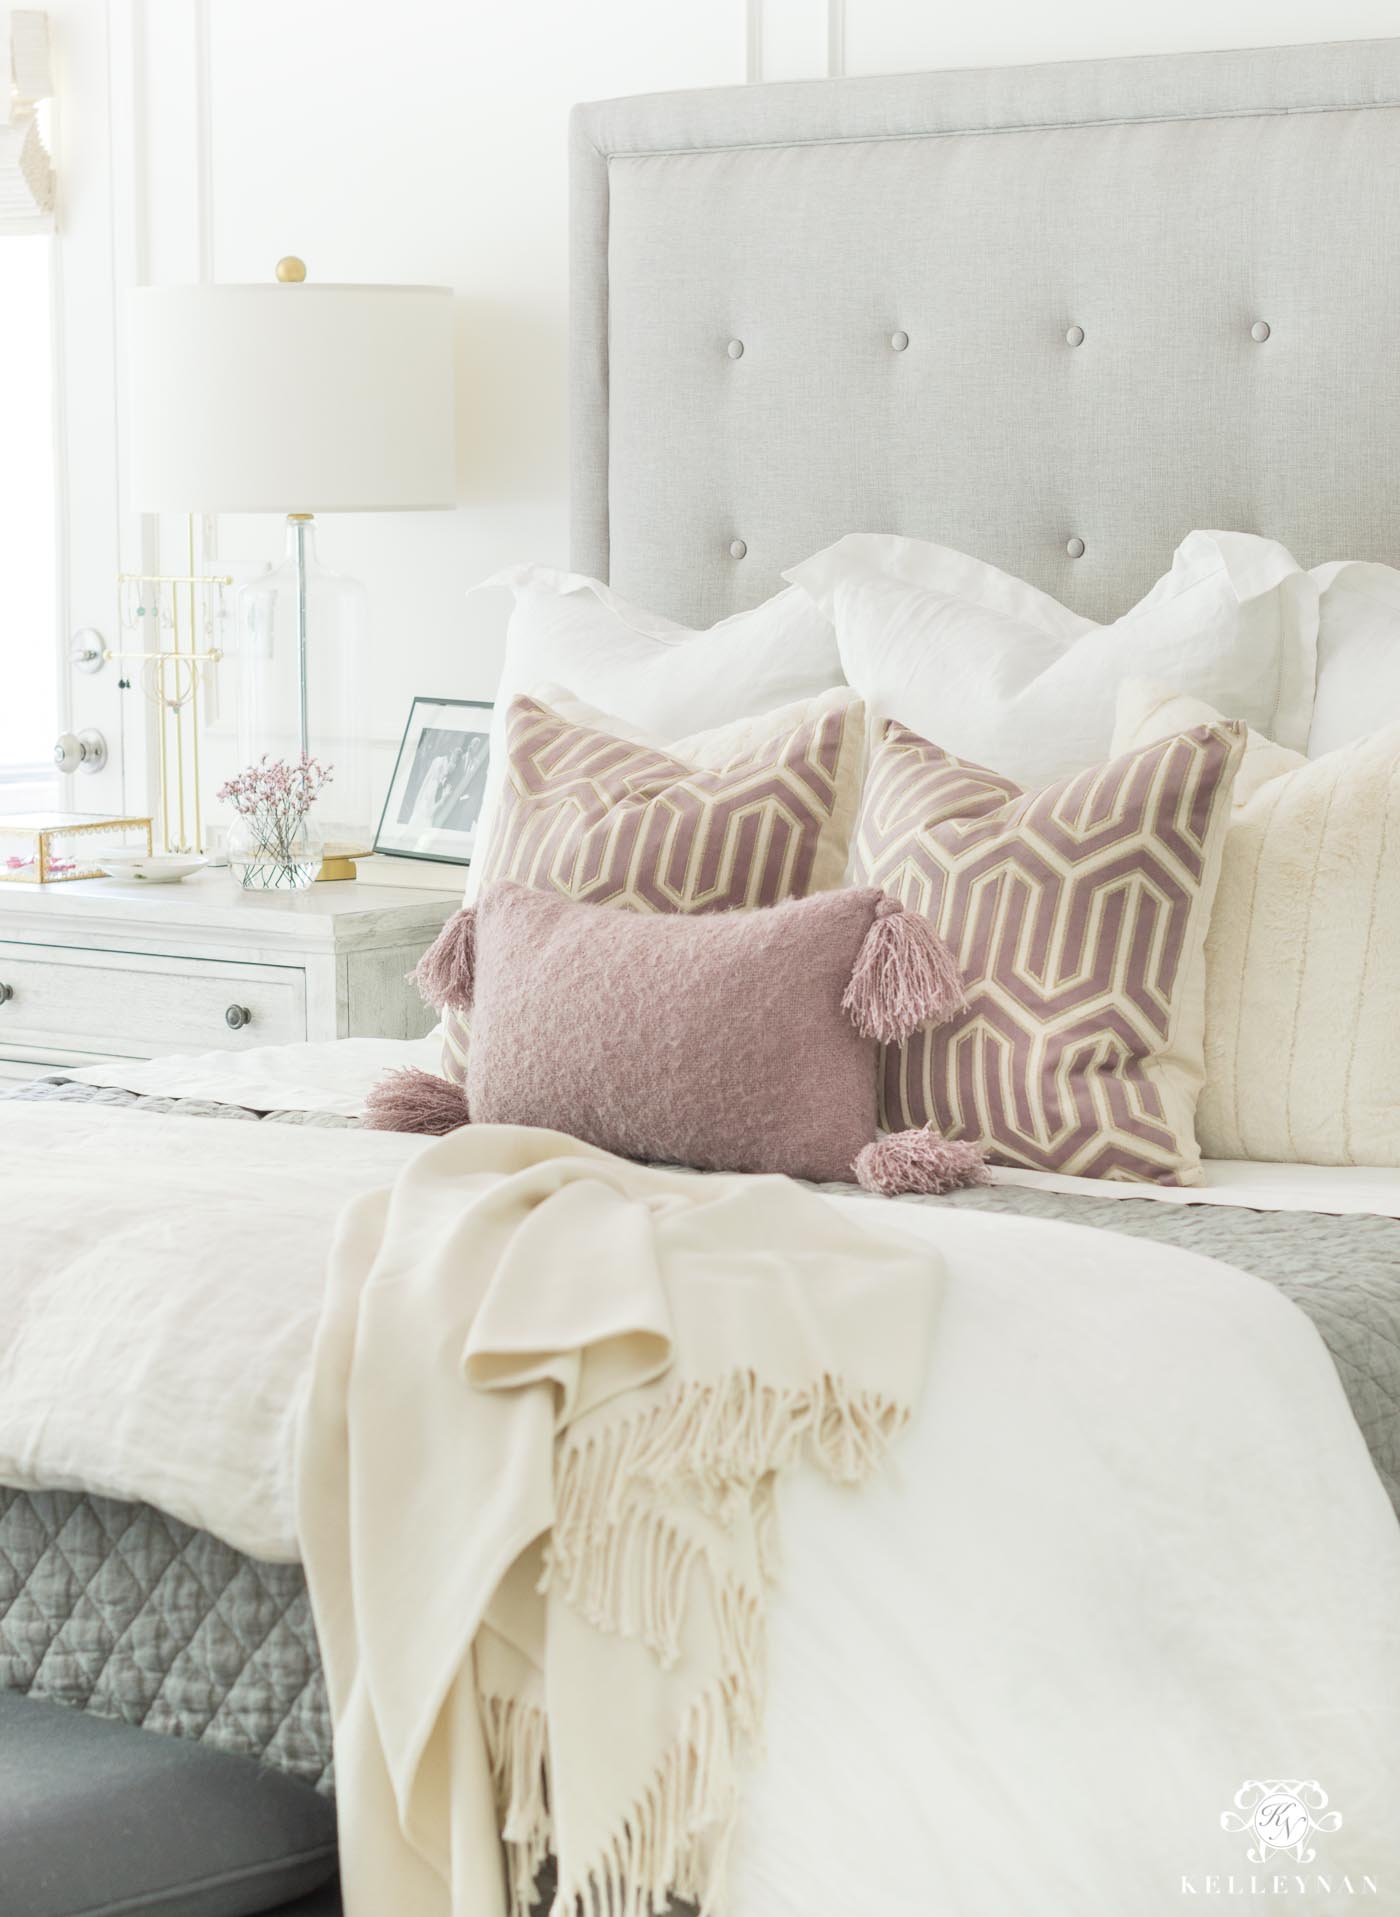 How to layer a bed with pillows and blankets